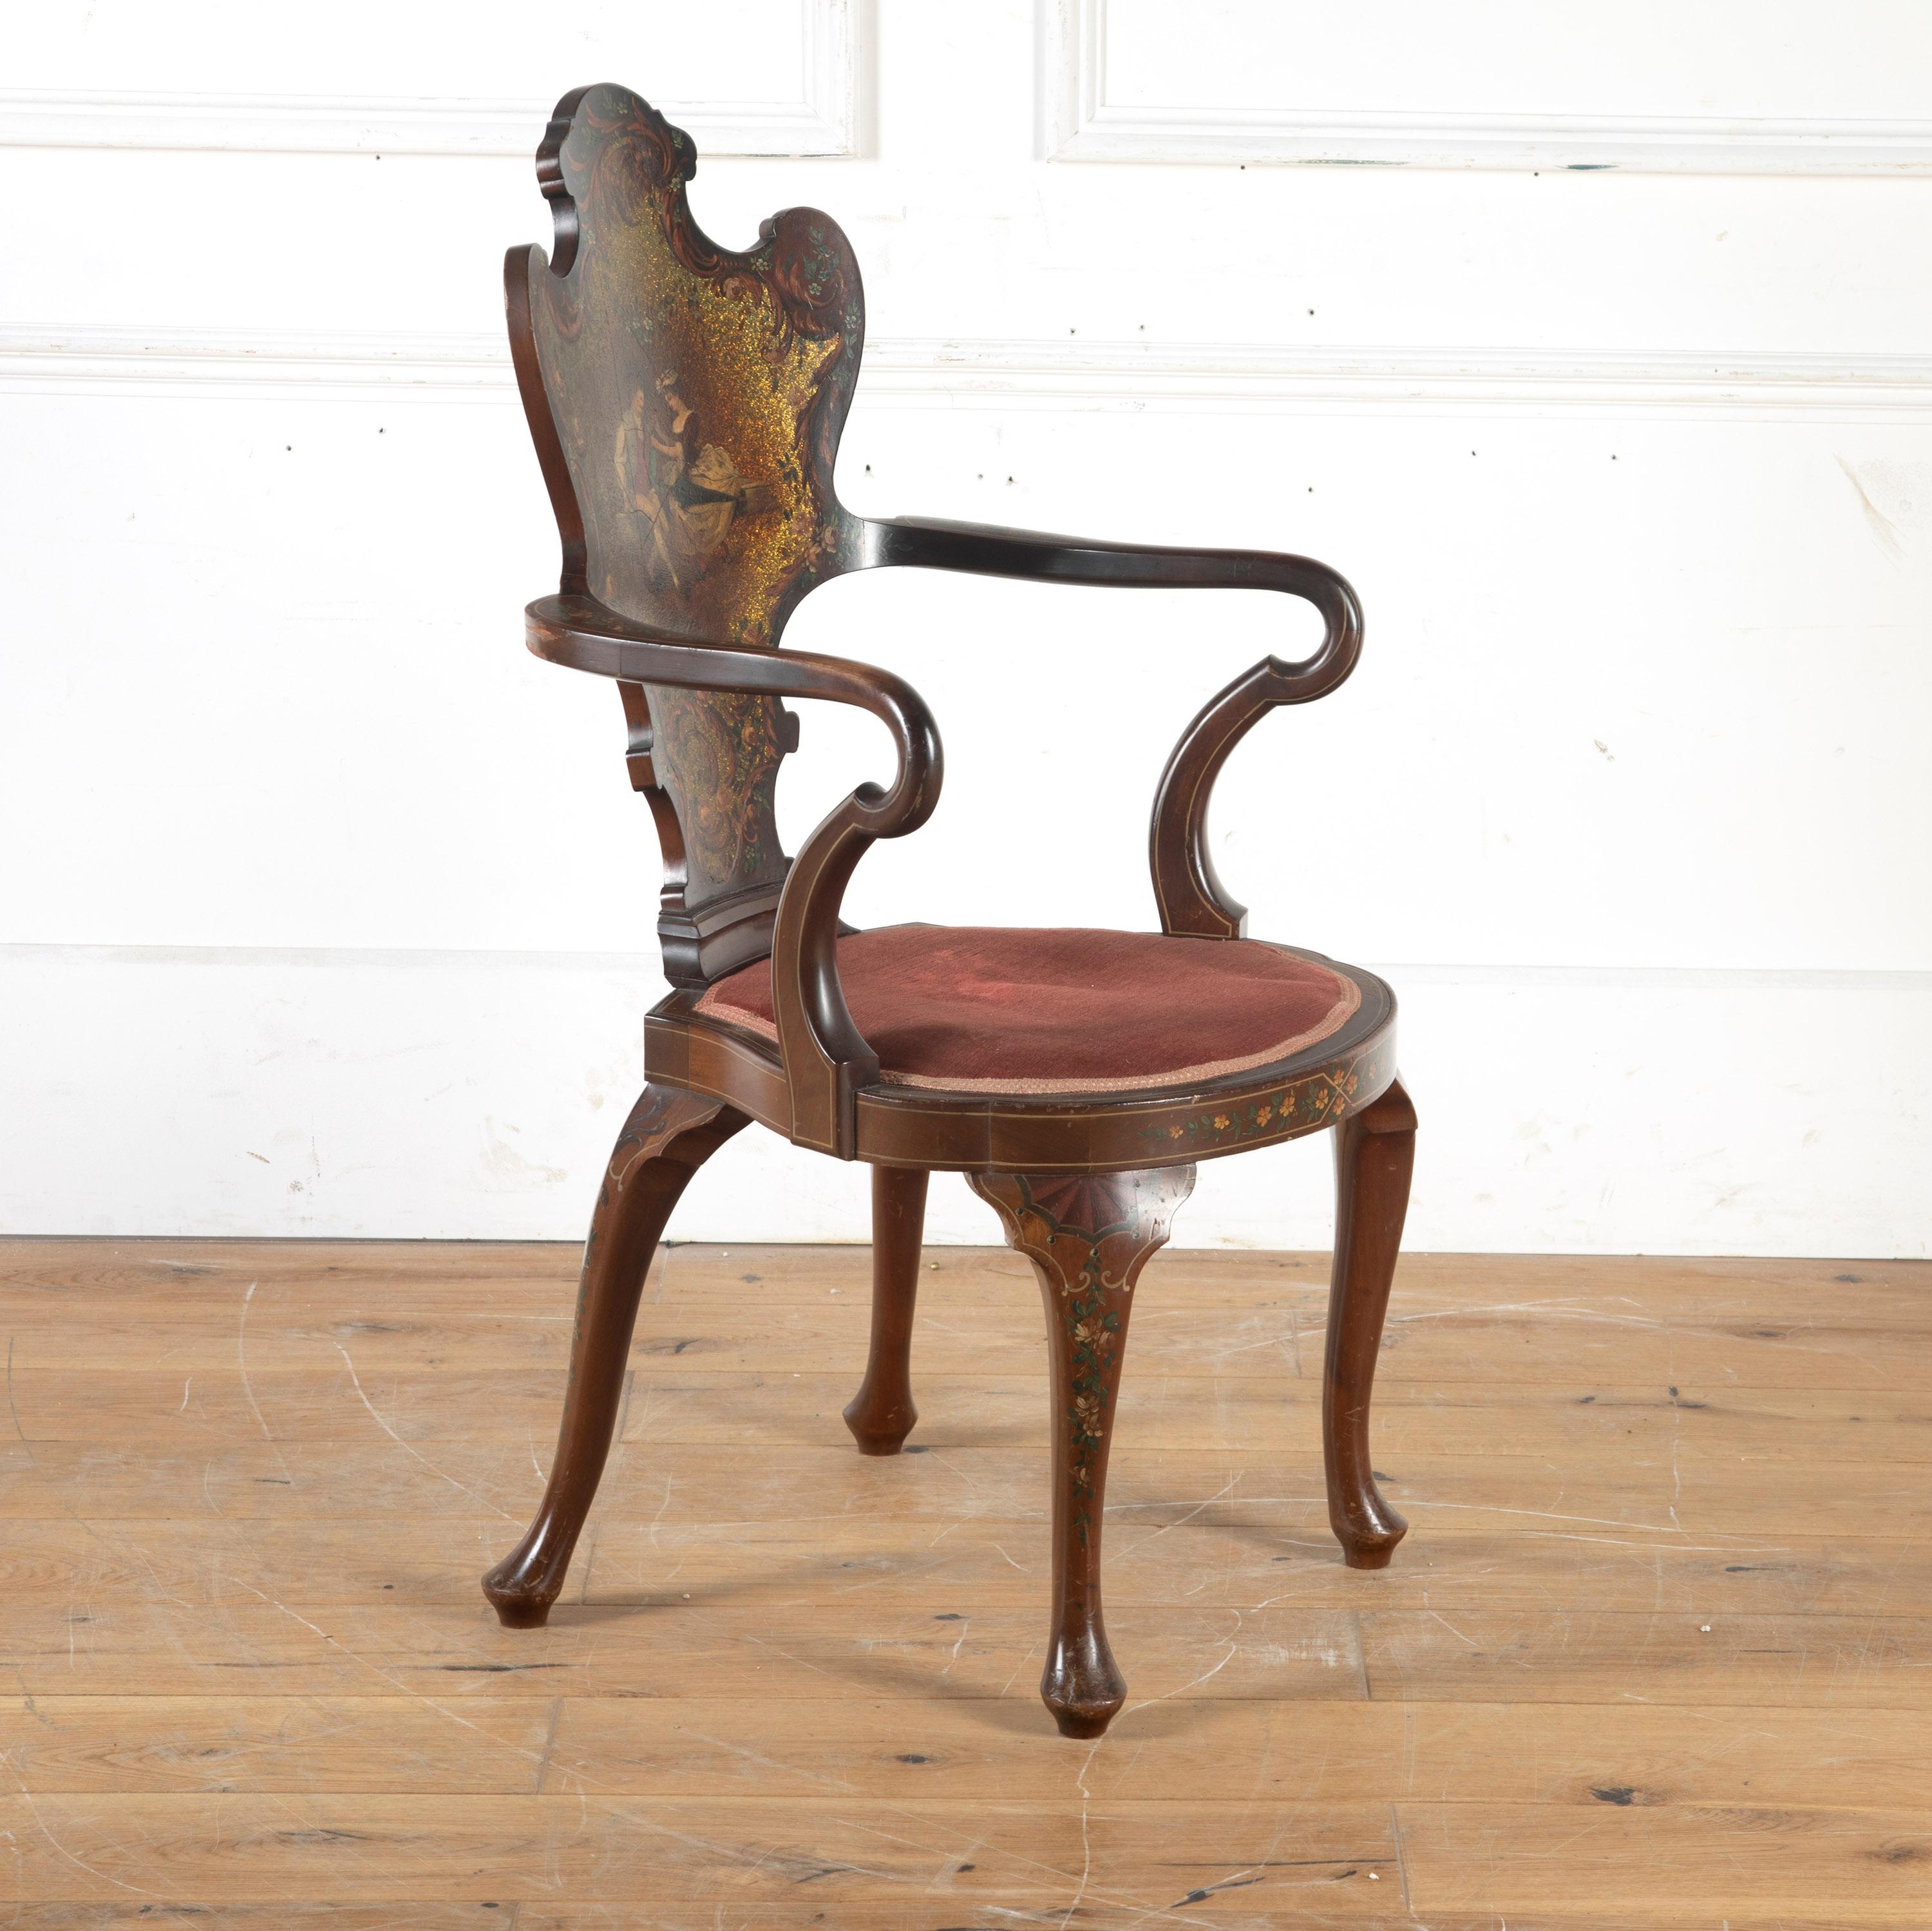 Highly decorative late 19th century salon chair in the Italian taste. 

This fine quality chair is made by the eminent makers Edwards & Roberts of Wardour Street and Oxford Street, London.

The chair is painted throughout with classic scenes and